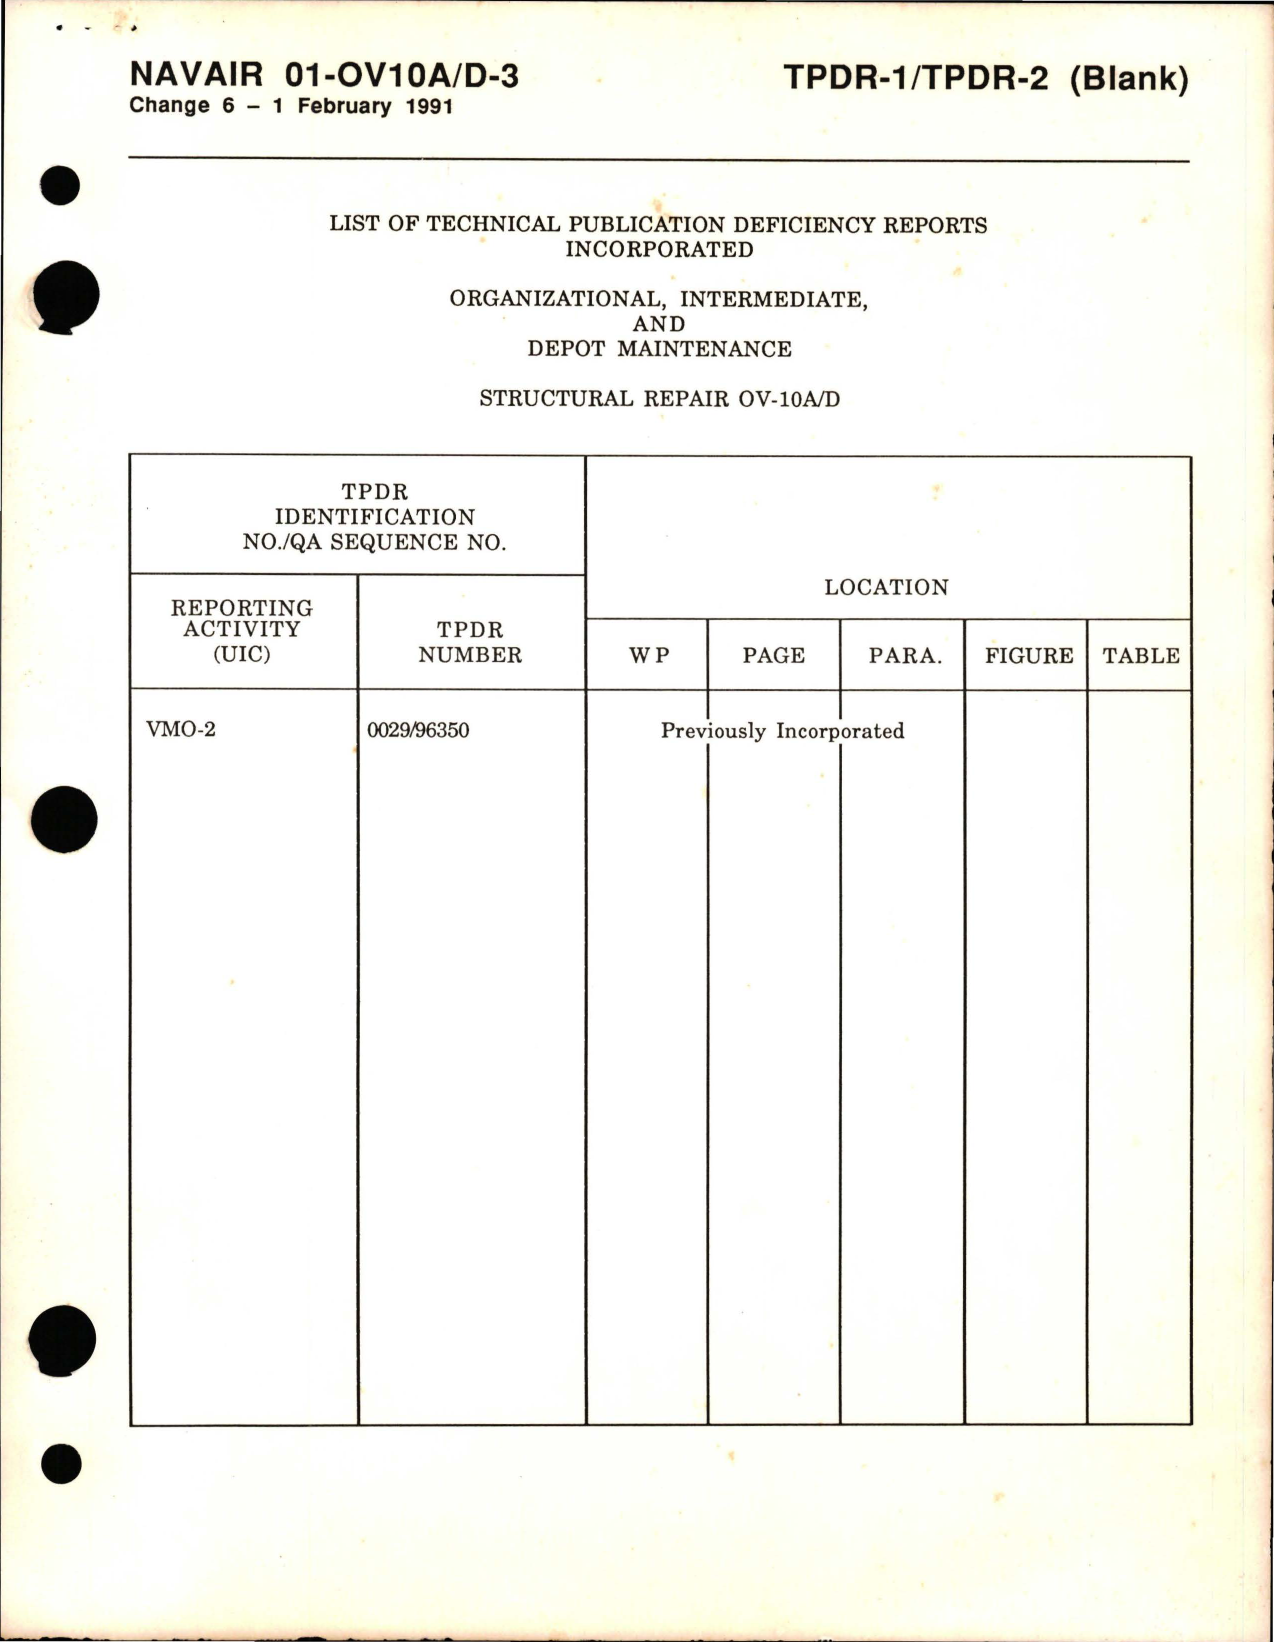 Sample page 5 from AirCorps Library document: Organizational, Intermediate and Depot Maintenance for Structural Repair on the OV-10A/D